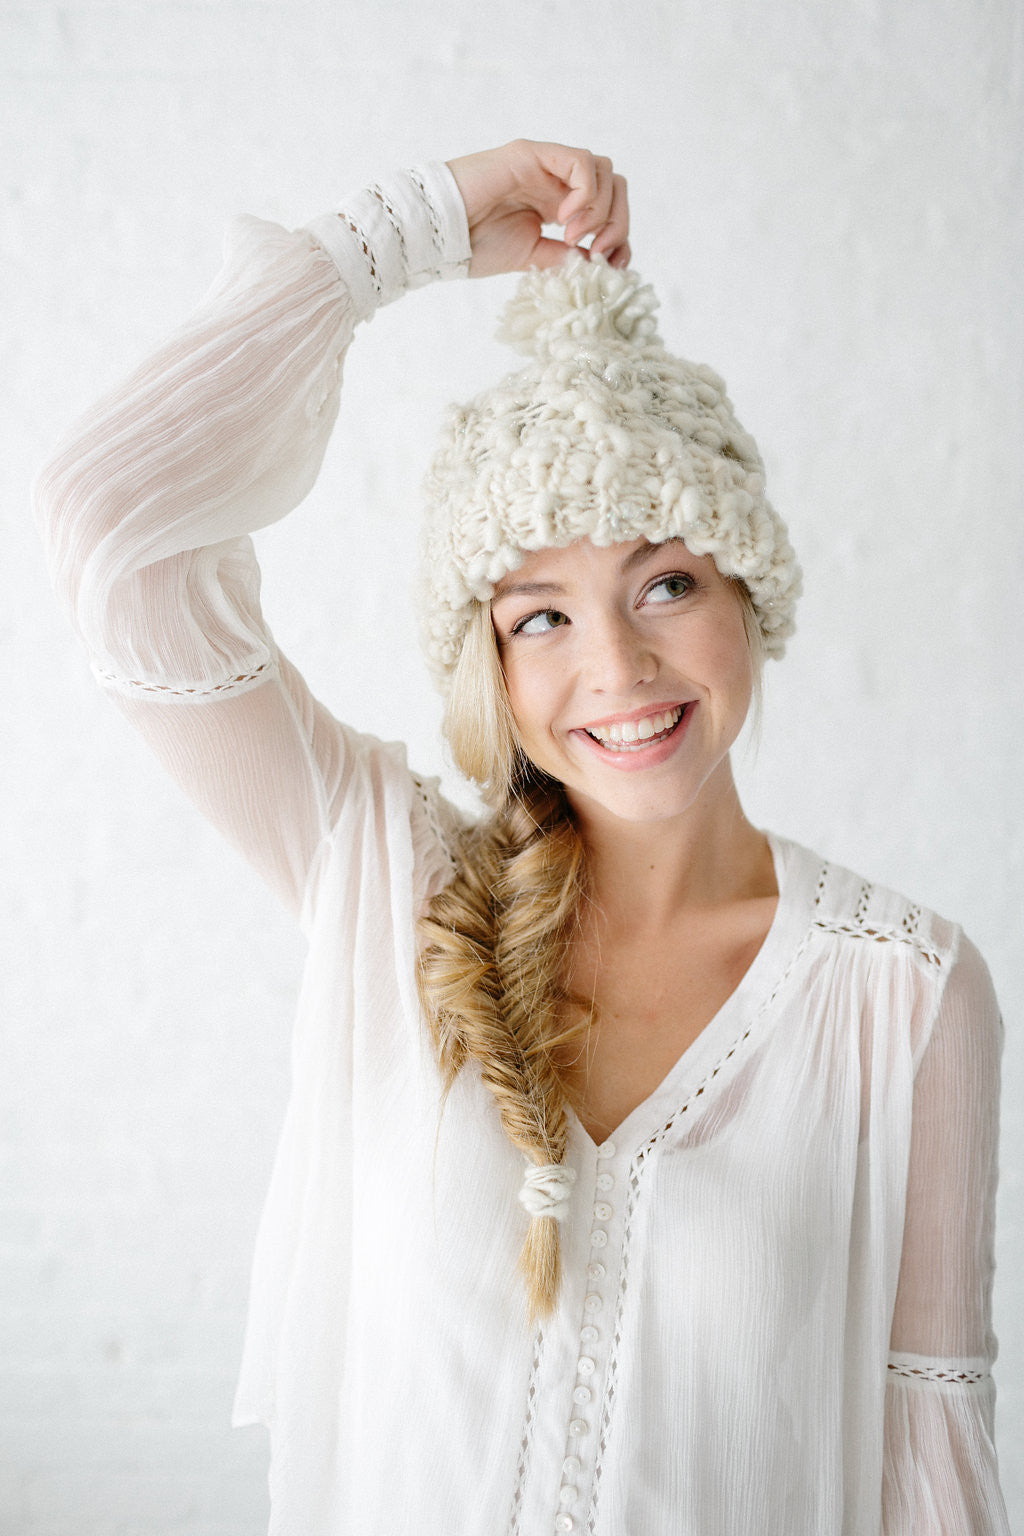 Knit Collage Snow Bunny Cable Beanie Hat Knitting Pattern